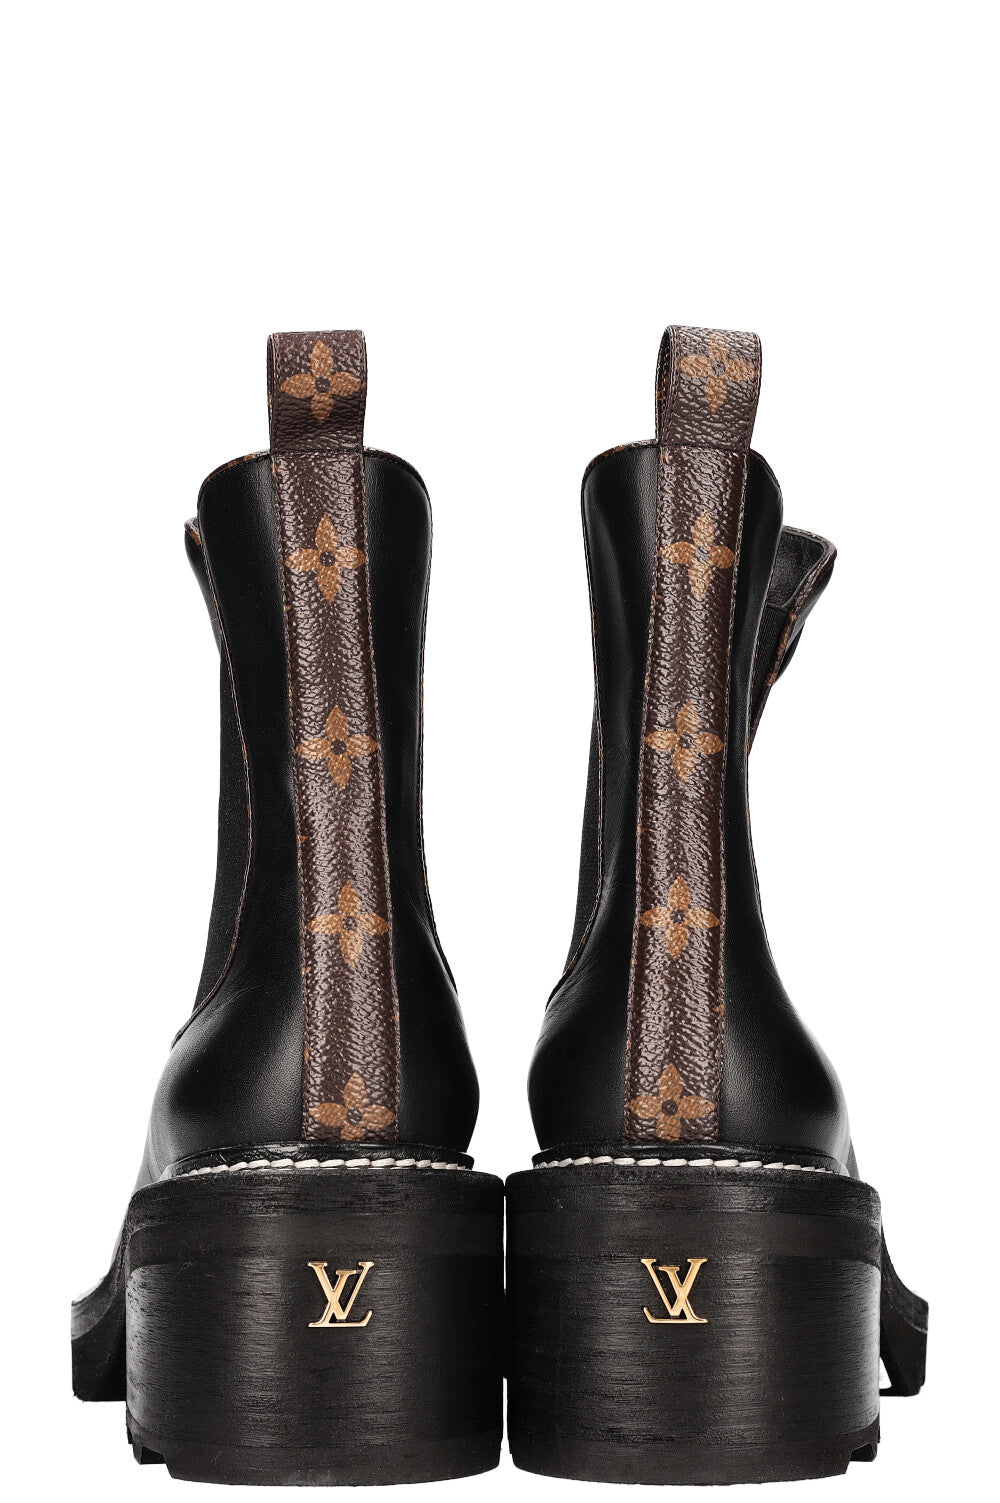 LV Beaubourg Ankle Boots - Shoes 1A8949